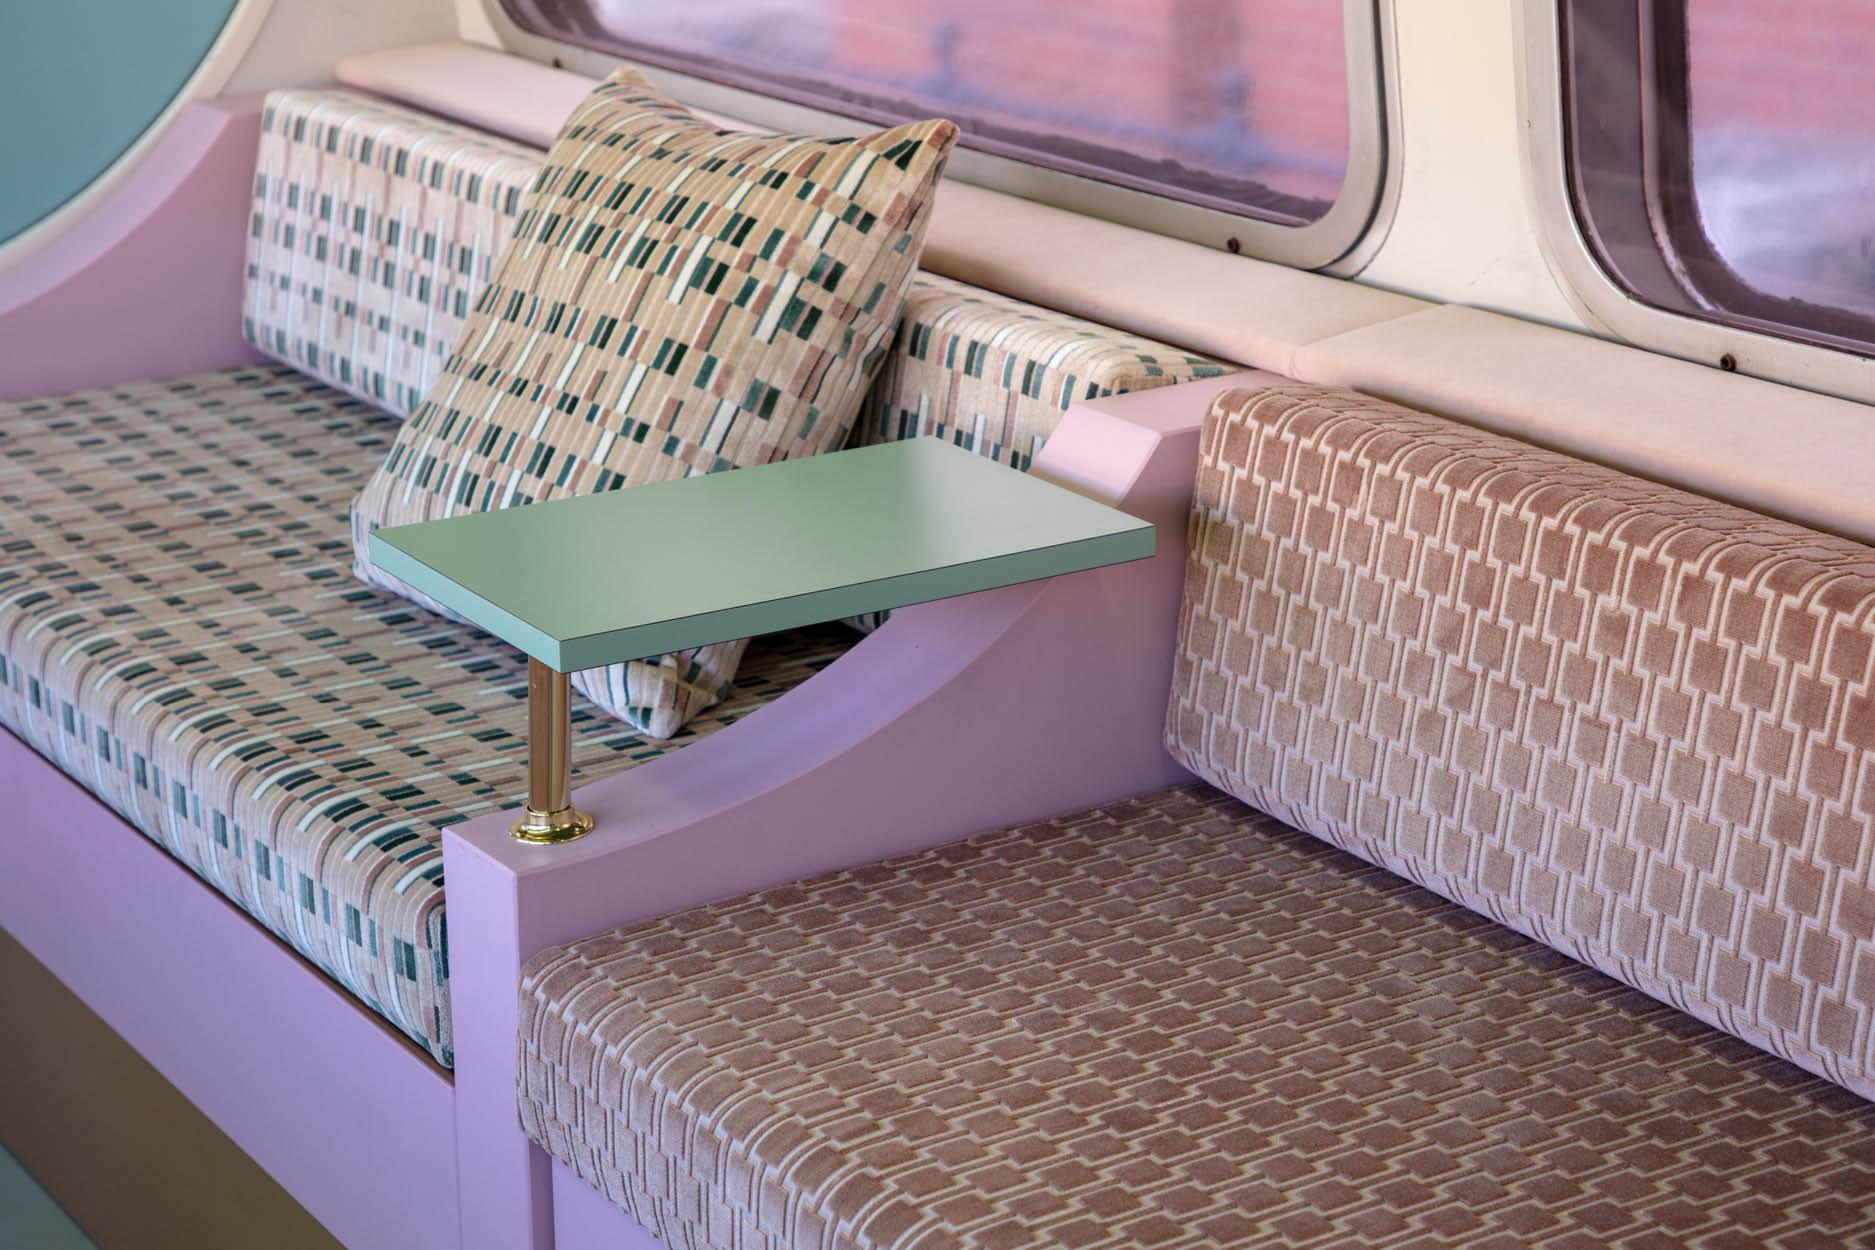 A 1967 London Underground Carriage is Livened Up by Dreamy Fabric Designs